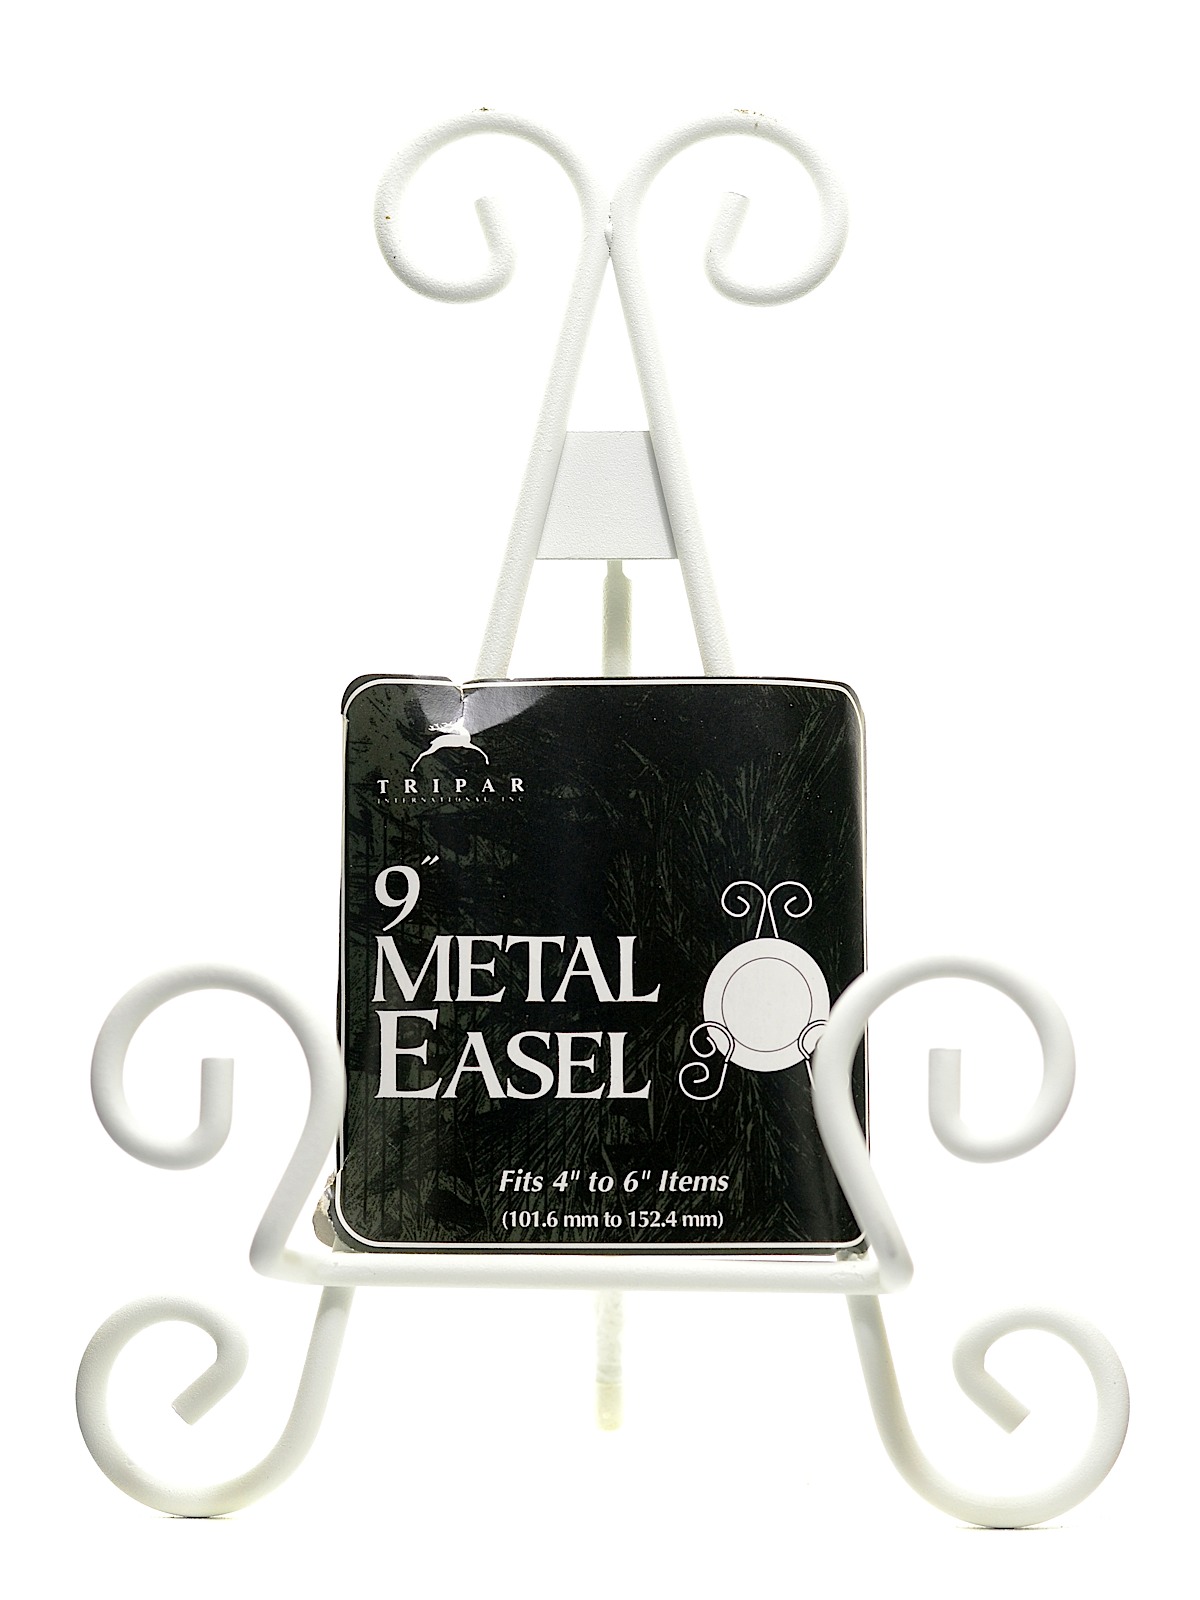 Stratford Metal Scroll Easels 9 In. Each Antique White